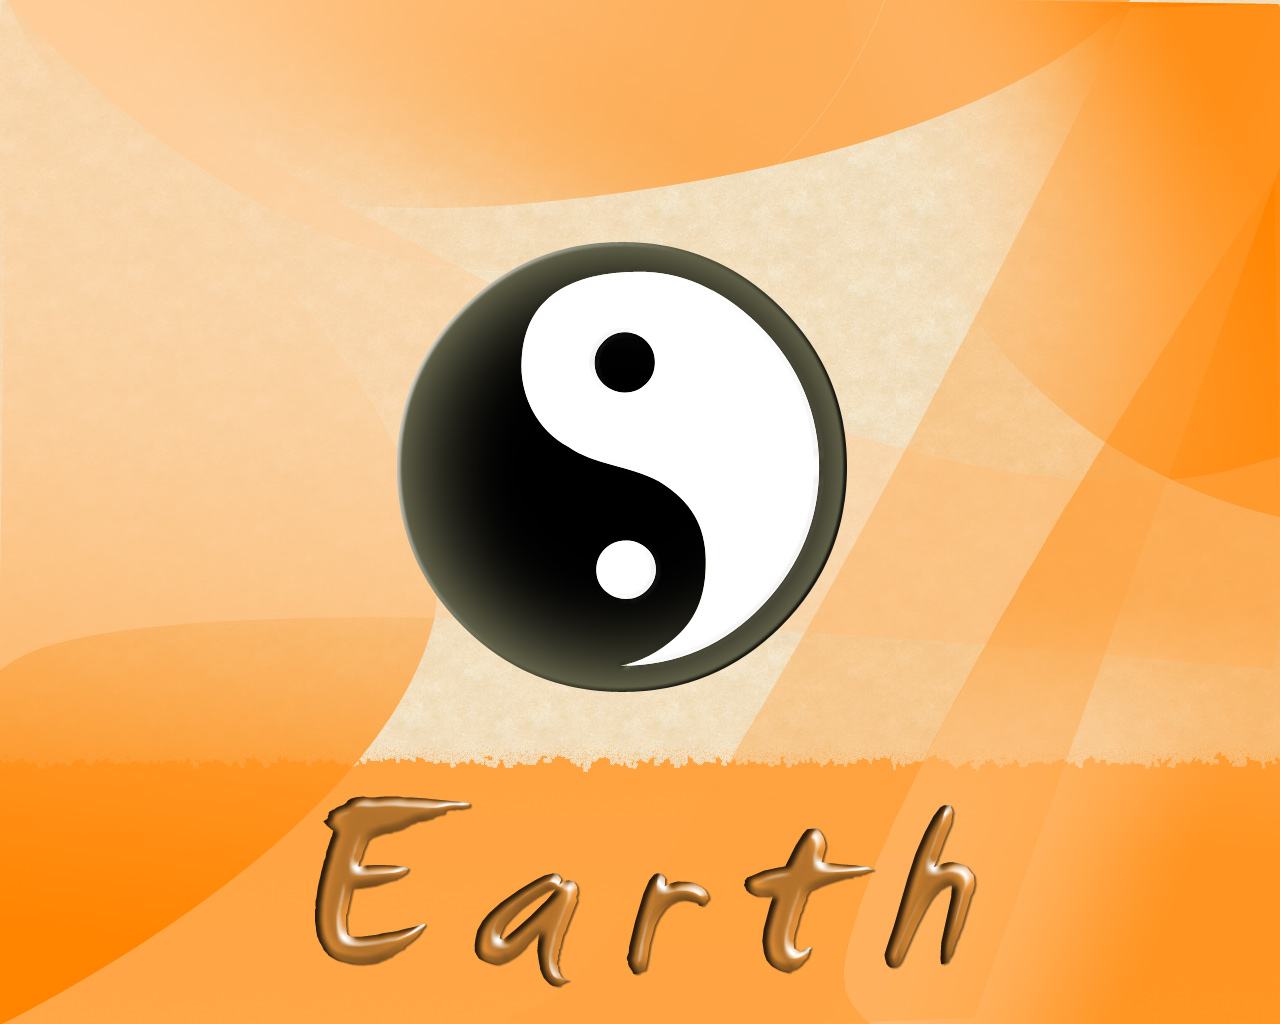 Earth feng shui wallpapers Feng Shui Doctrine articles and e books